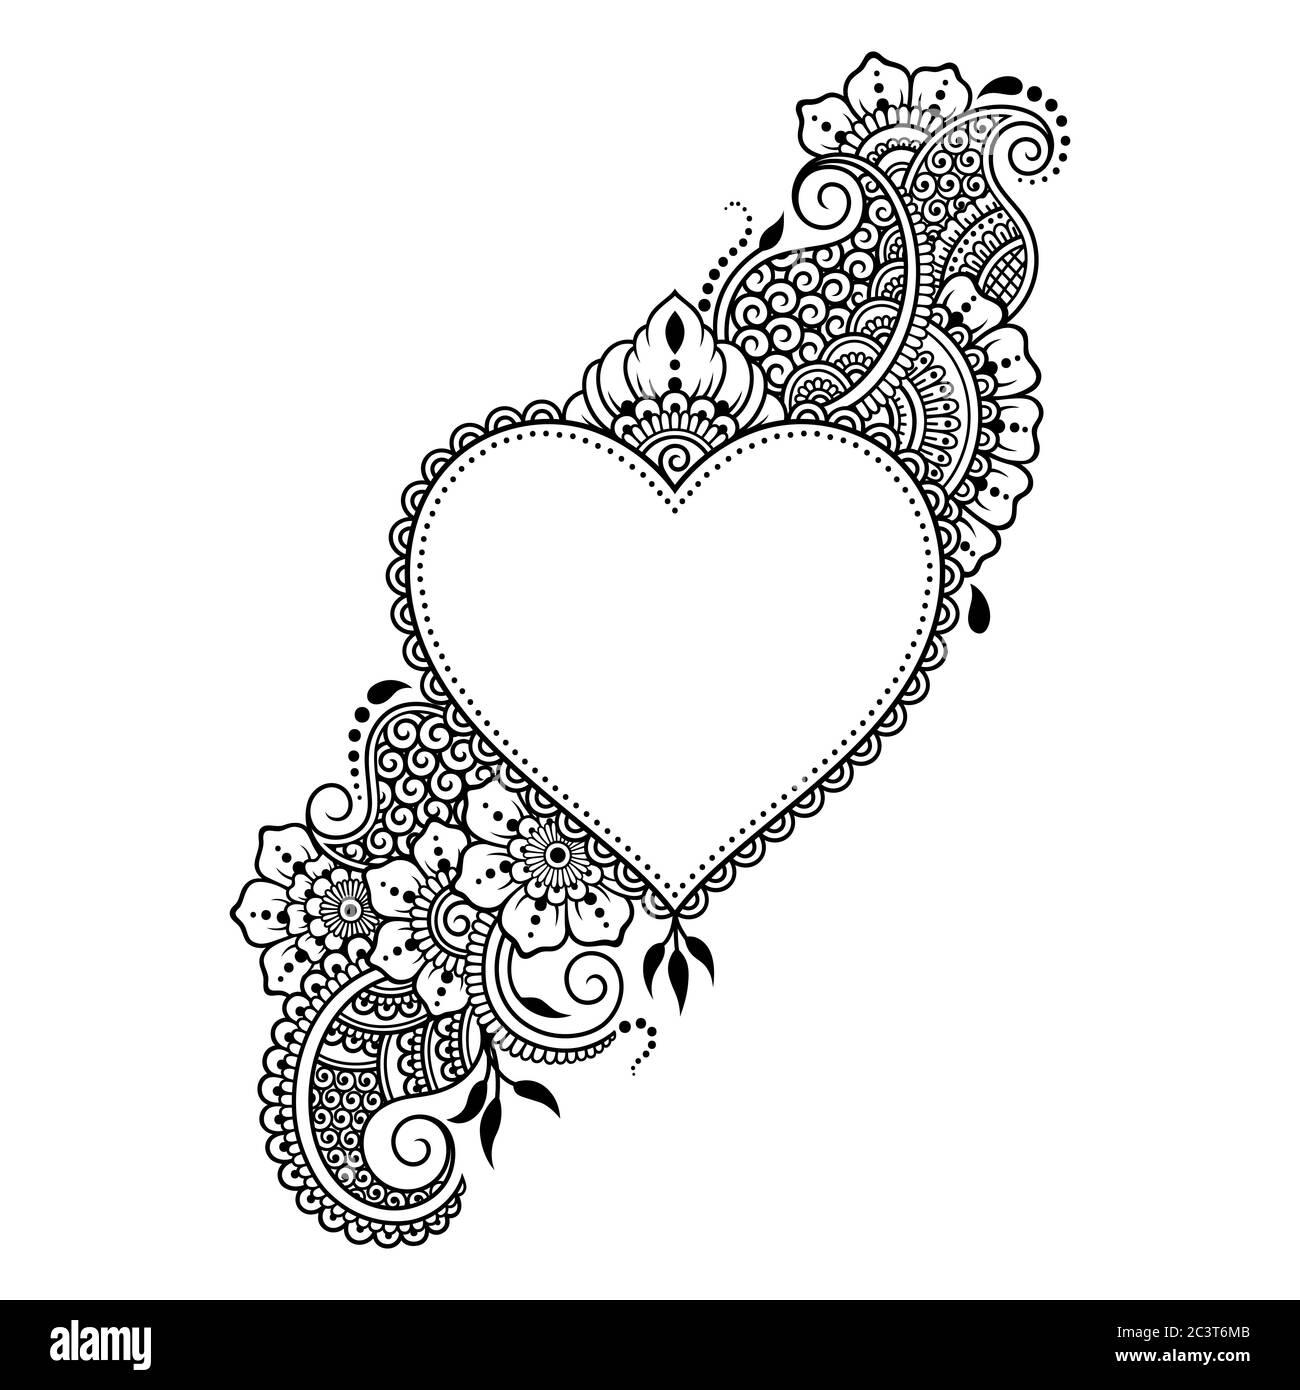 Mehndi Flower Pattern With Heart For Henna Drawing And Tattoo Decoration In Ethnic Oriental Indian Style Stock Vector Image Art Alamy